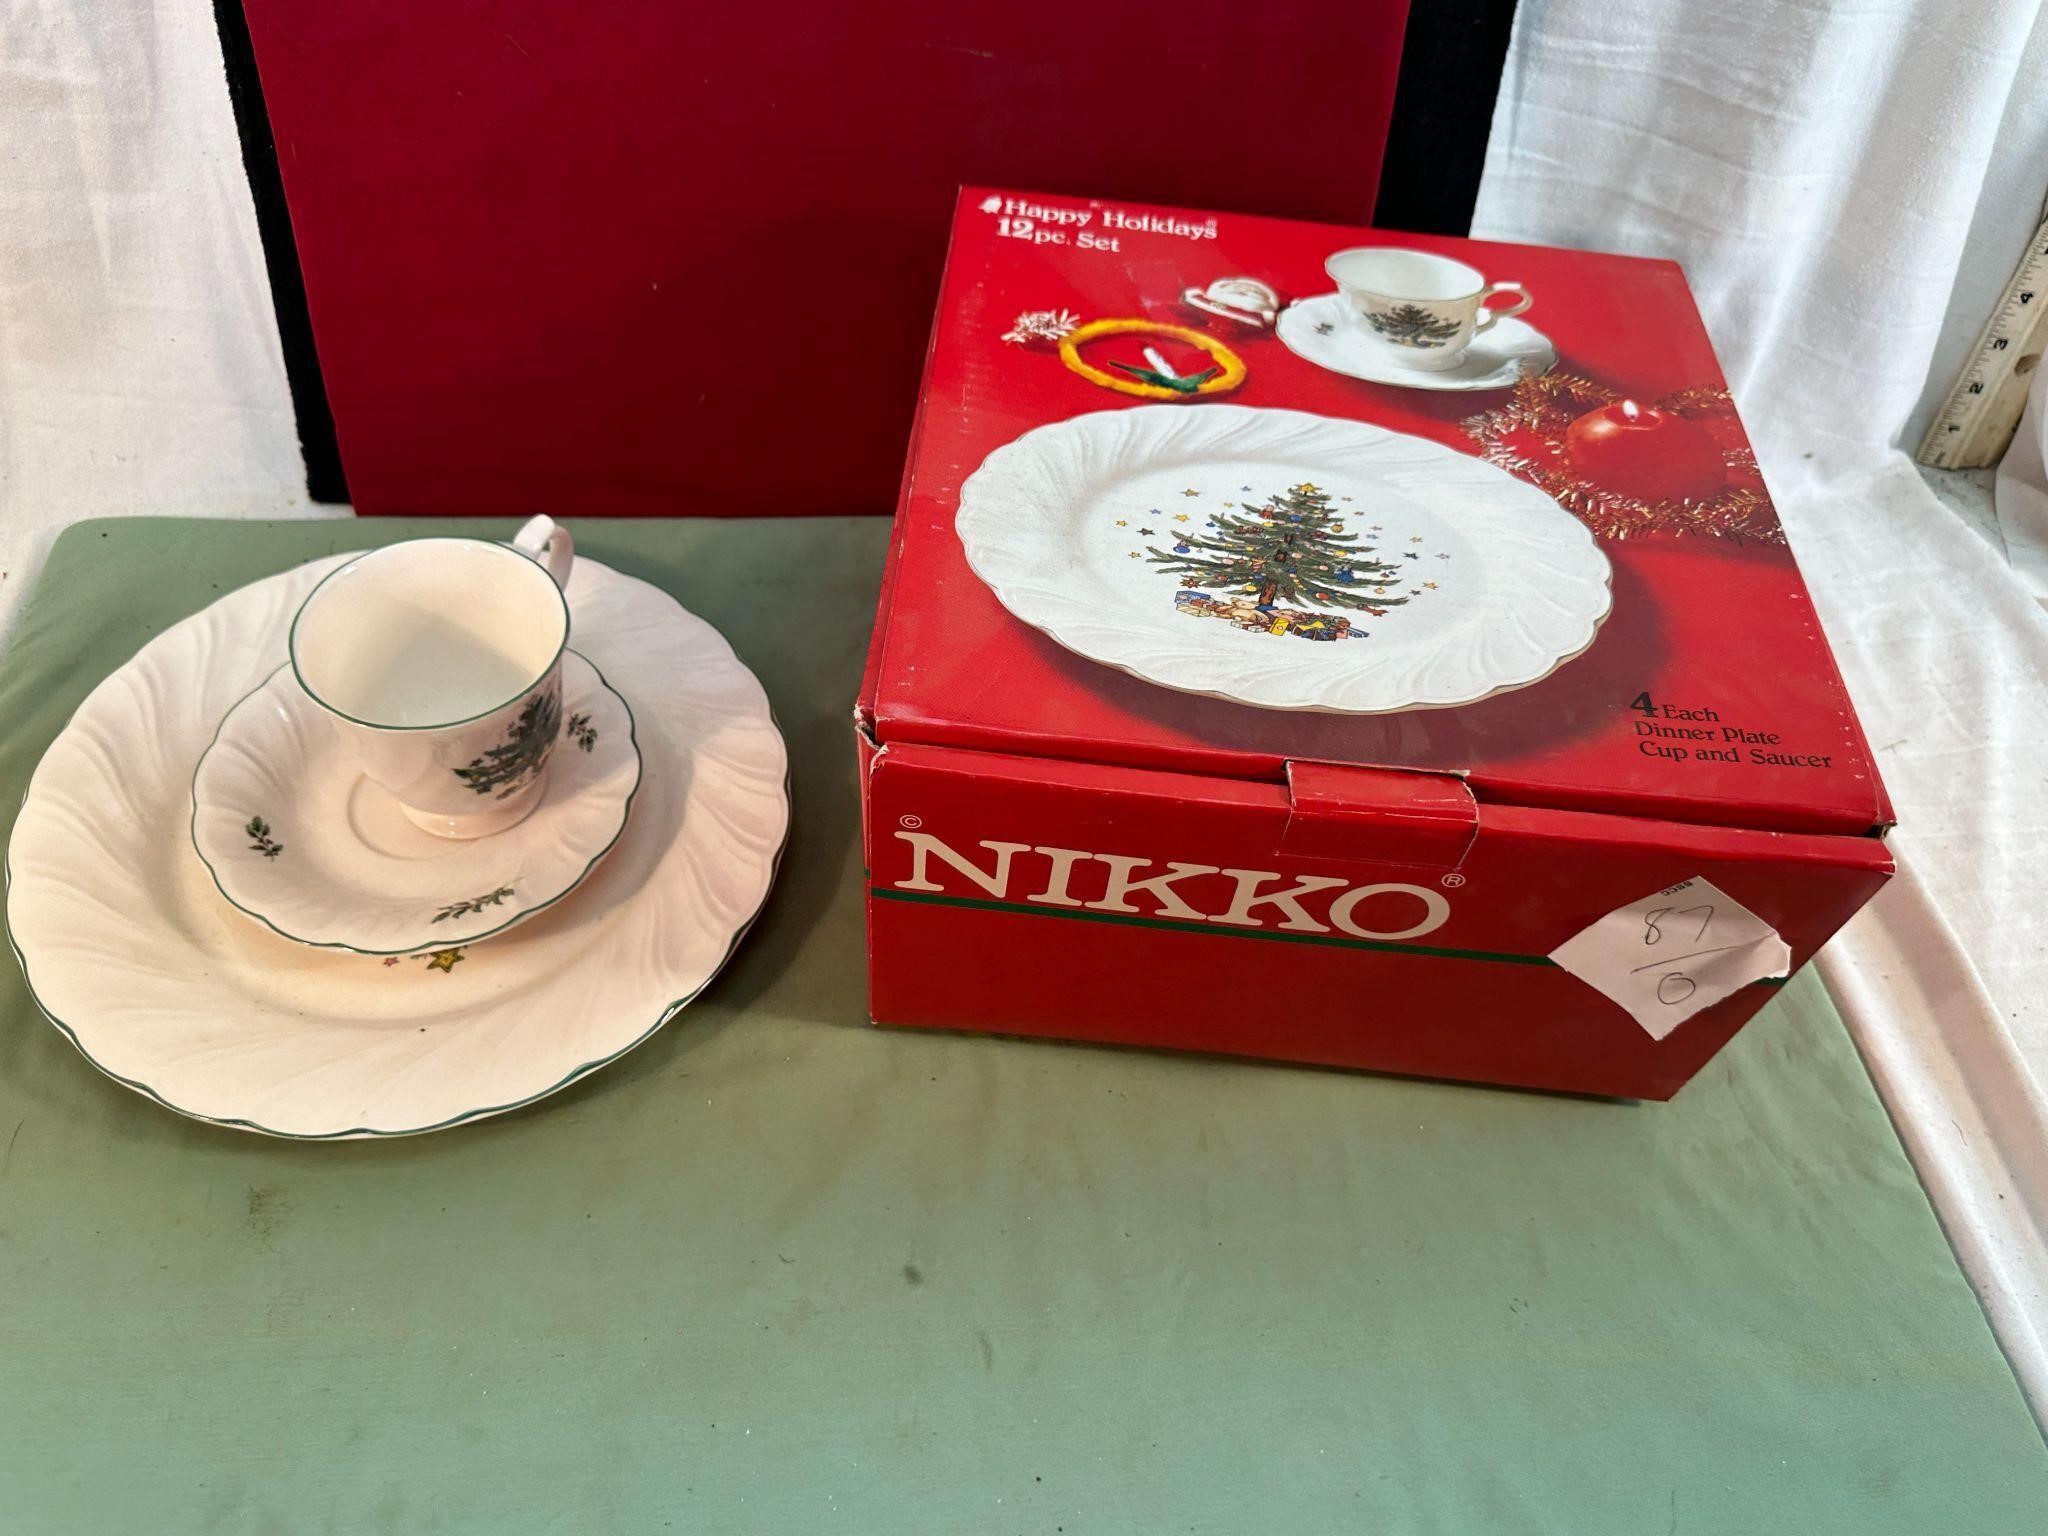 NIKKO HAPPY HOLIDAY SERVICE FOR 5 DISHES